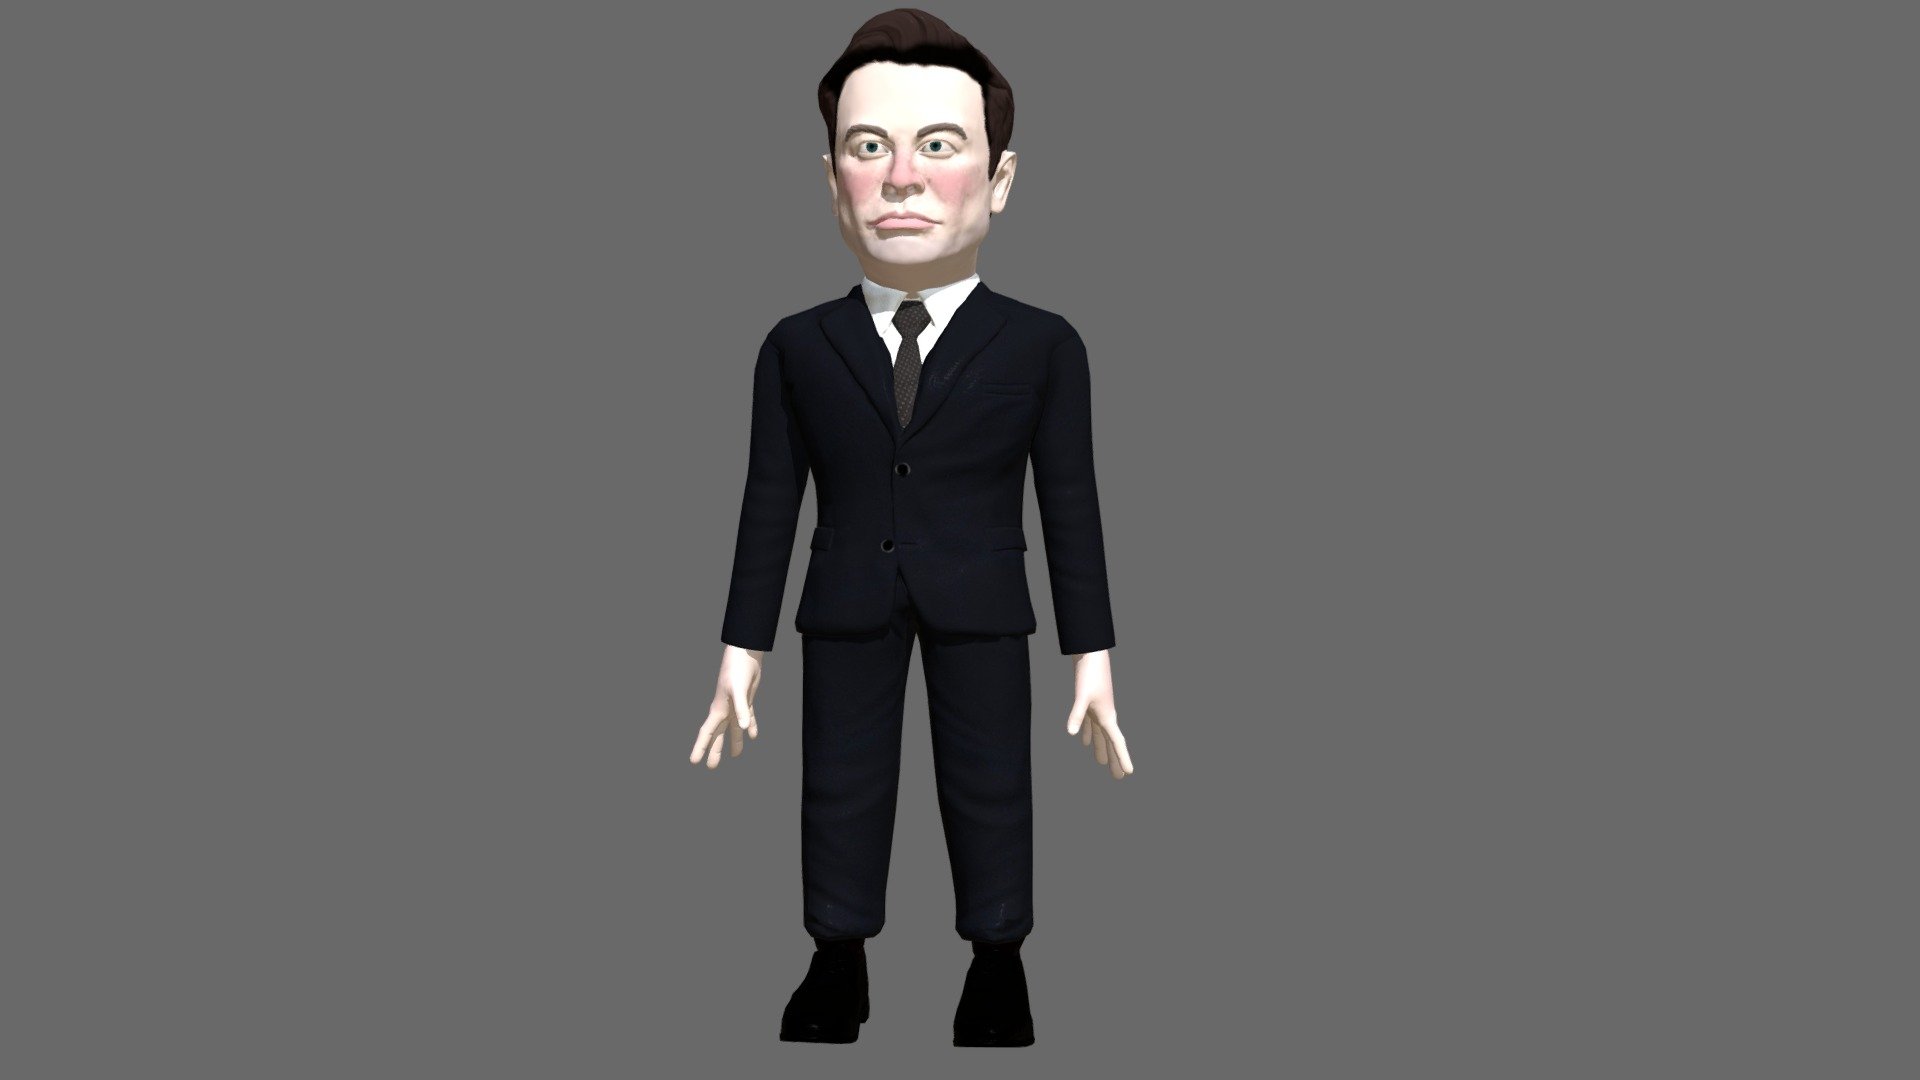 Low poly, game ready rigged, animated 3D caricature of Elon Musk.

textures are 4K. Color map, normal map and spec map are included.

Character have 7833 polygons, or 15143 triangles.

Indluced are 2 custom animations as in video.

Rig is made for humanoid mecanim system in Unity game engine.

Simple facial controls are rigged in Maya. No blendshapes are included.

T-posed FBX file and Maya file with rig is included under additional files. 

Browse my store to see more of my caricature works 3d model